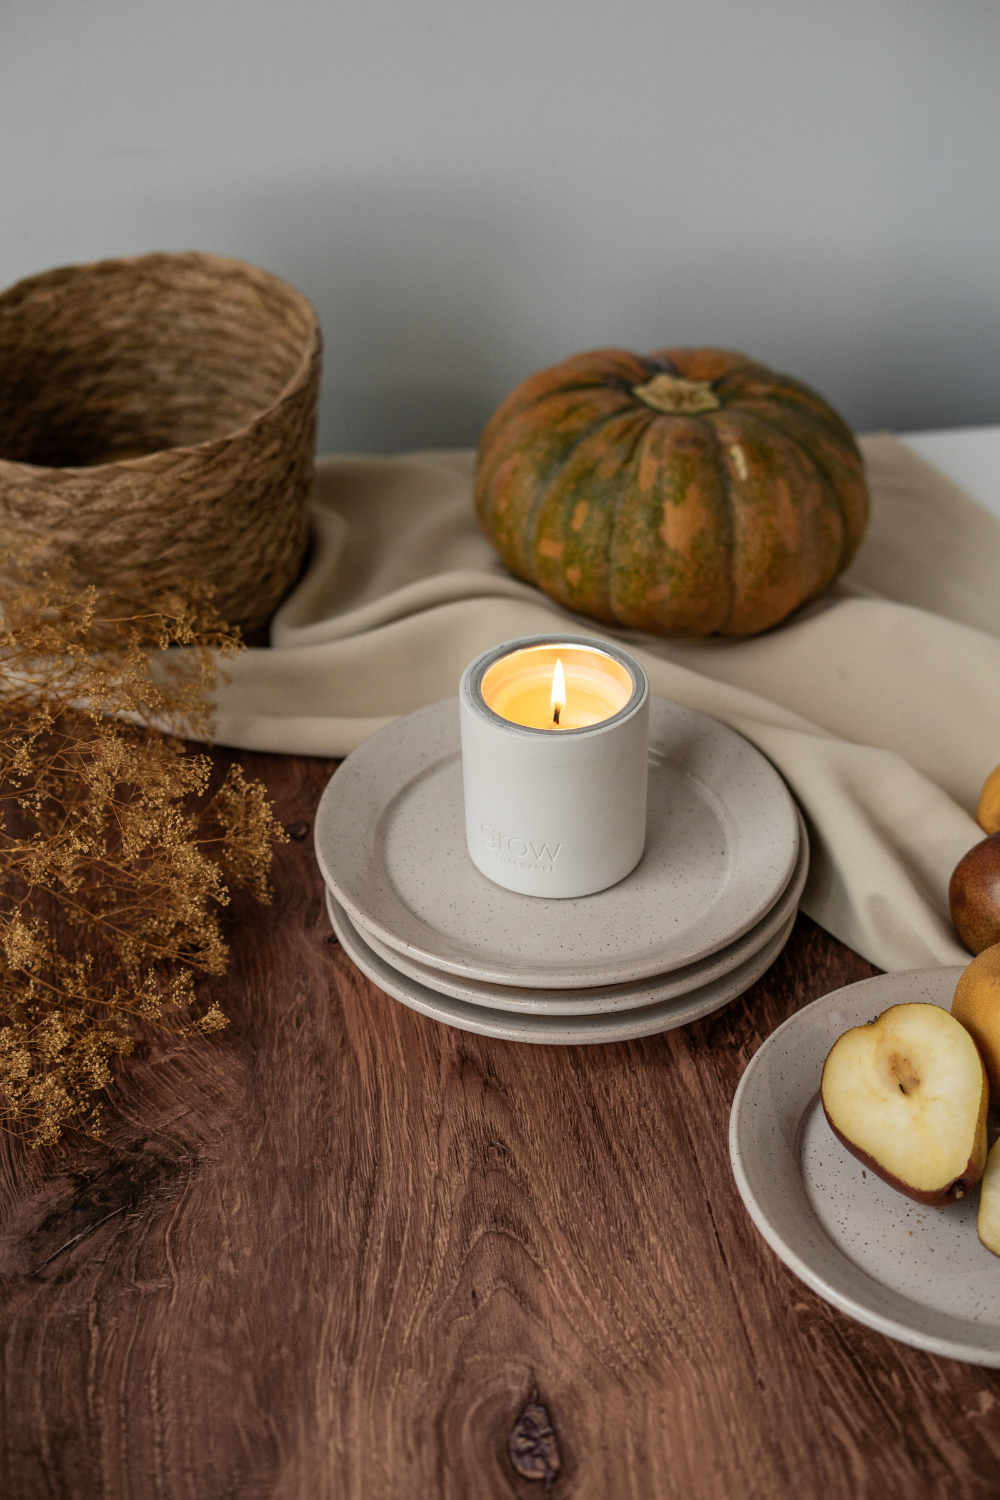 Fall signature scent Personalized fall fragrance Seasonal home fragrance Nontoxic air freshener Air + fabric freshener Home scent customization Fall scent pairing Memorable home fragrance Guest-friendly aromas Fall home scent experience